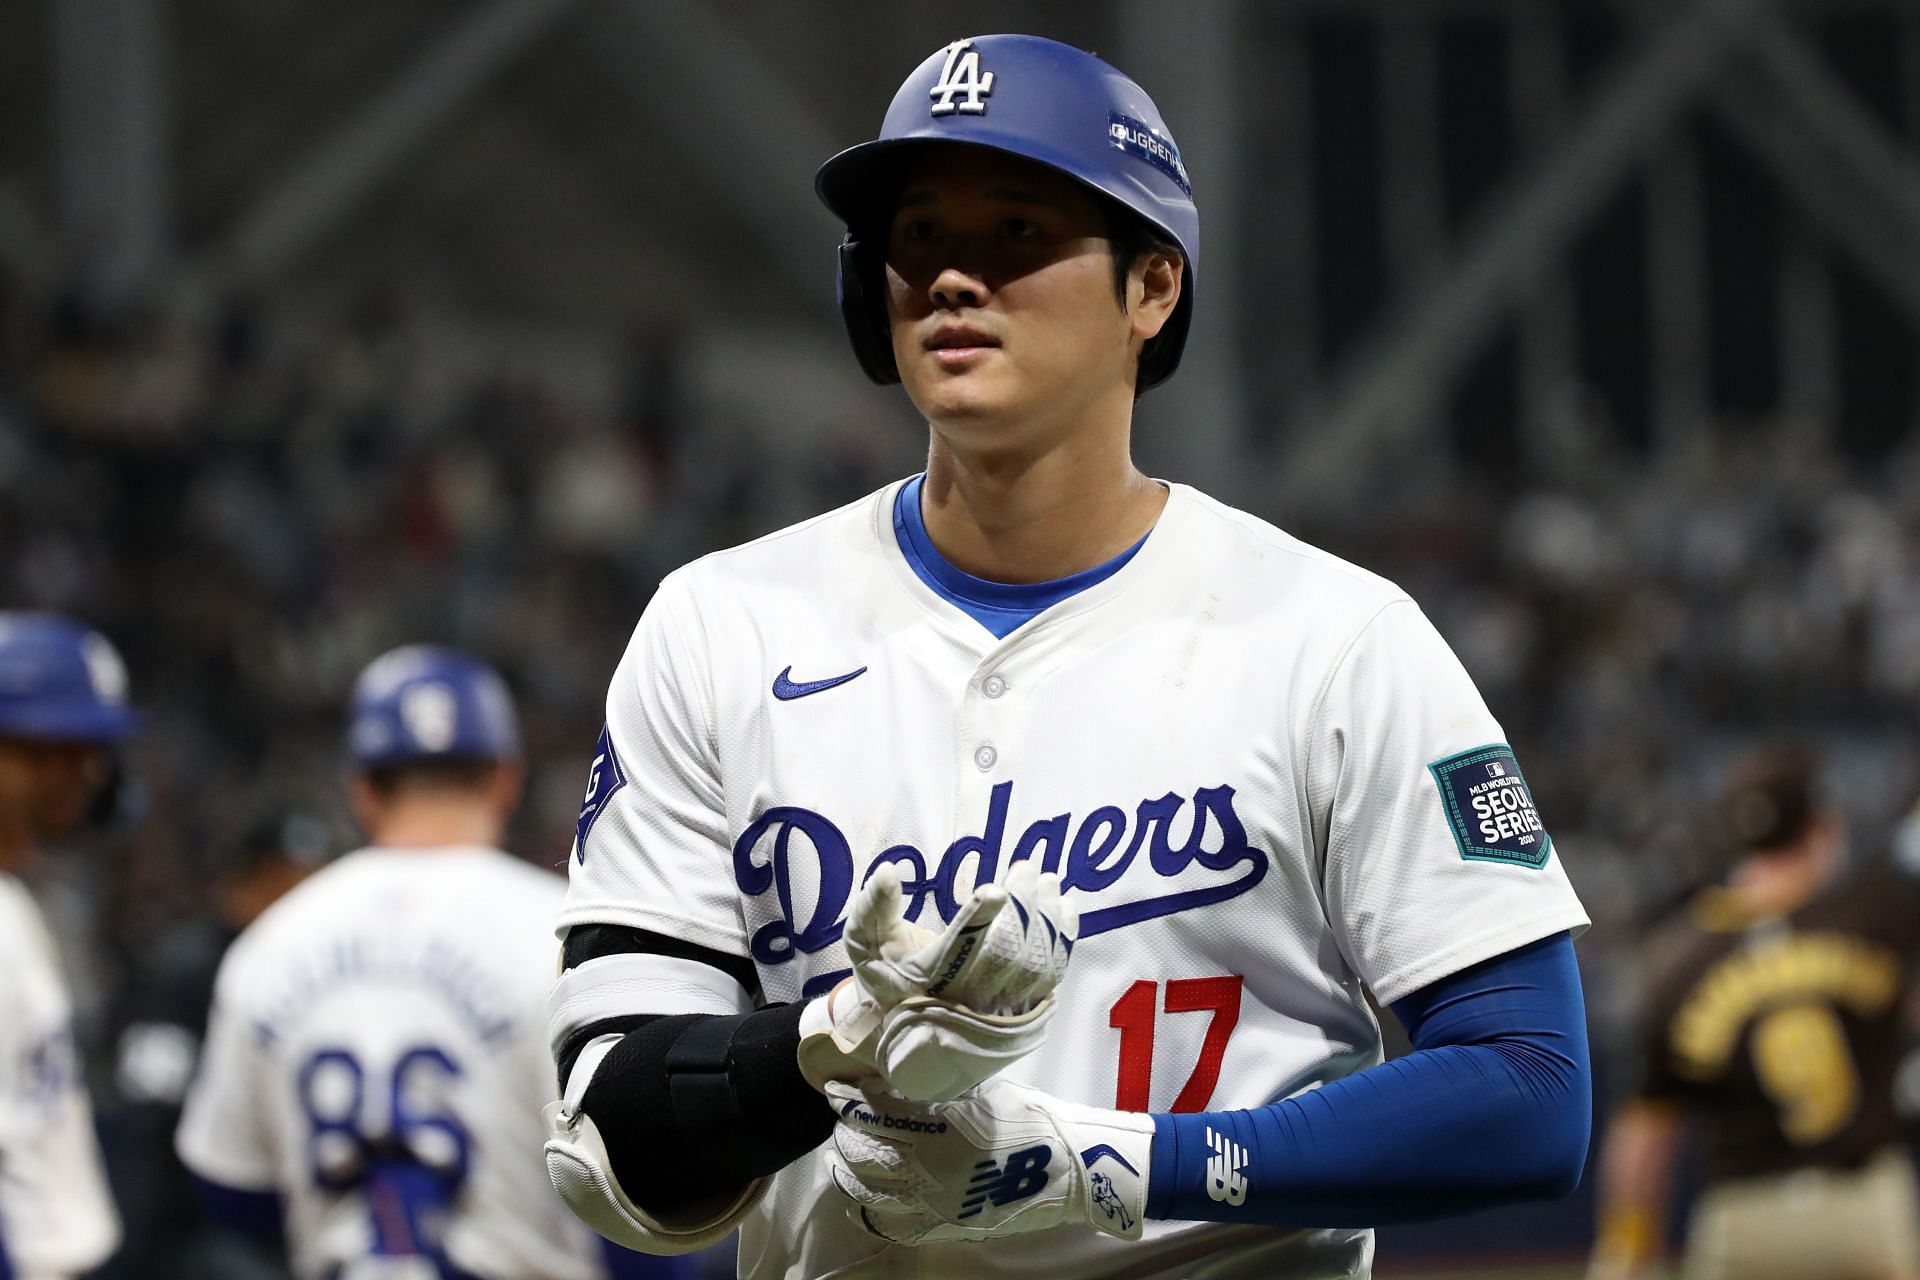 Shohei Ohtani and the Dodgers are 1-1